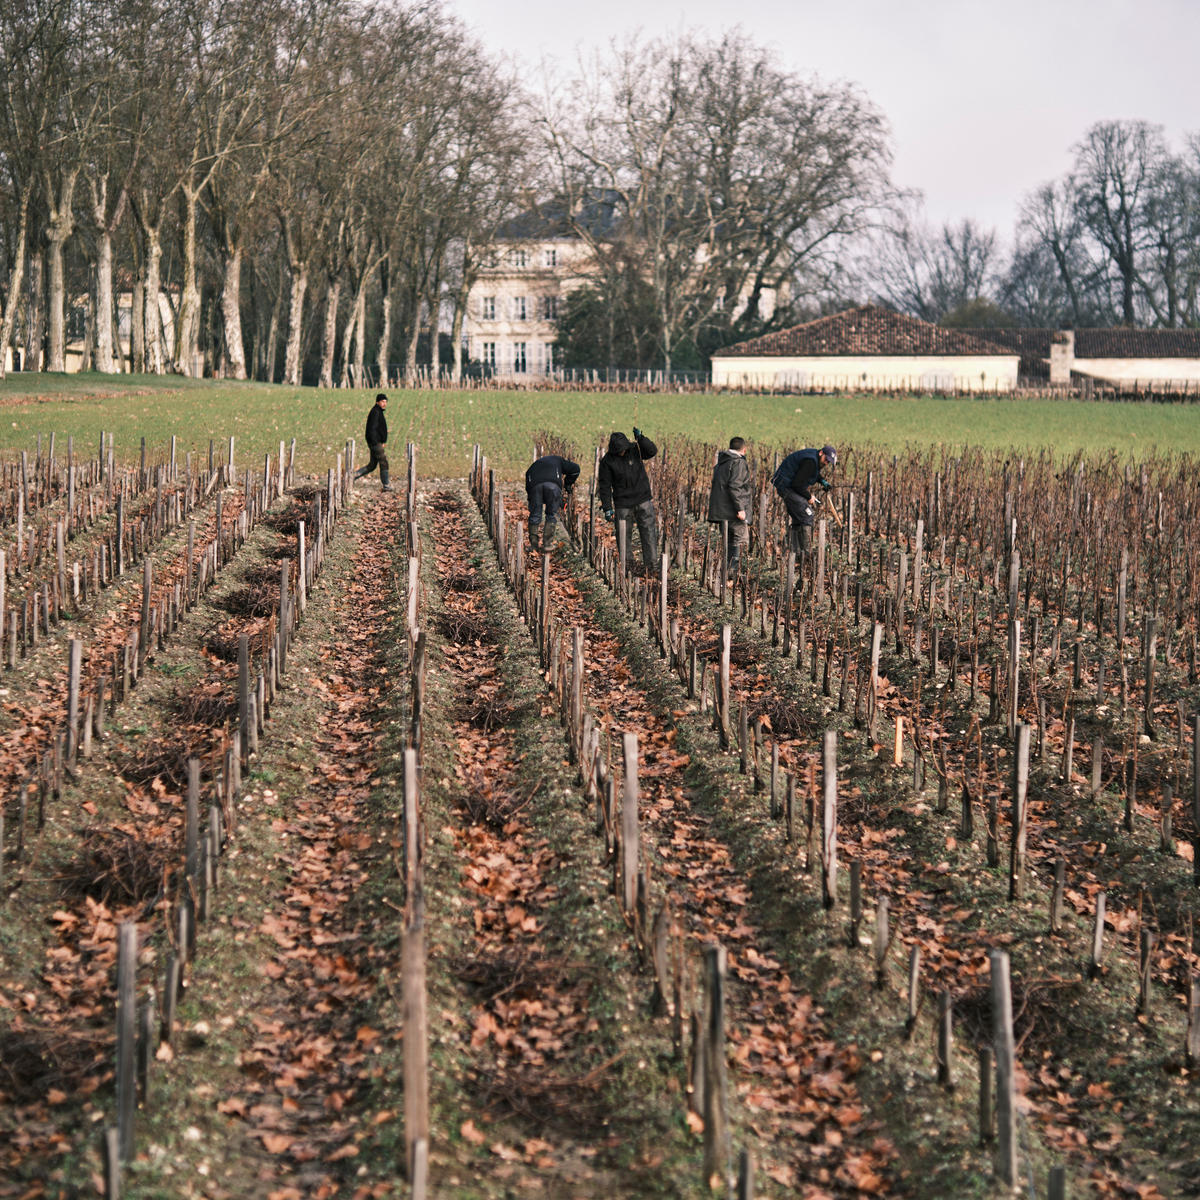 Vineyard workers in the vines in front of Chateau Margaux.